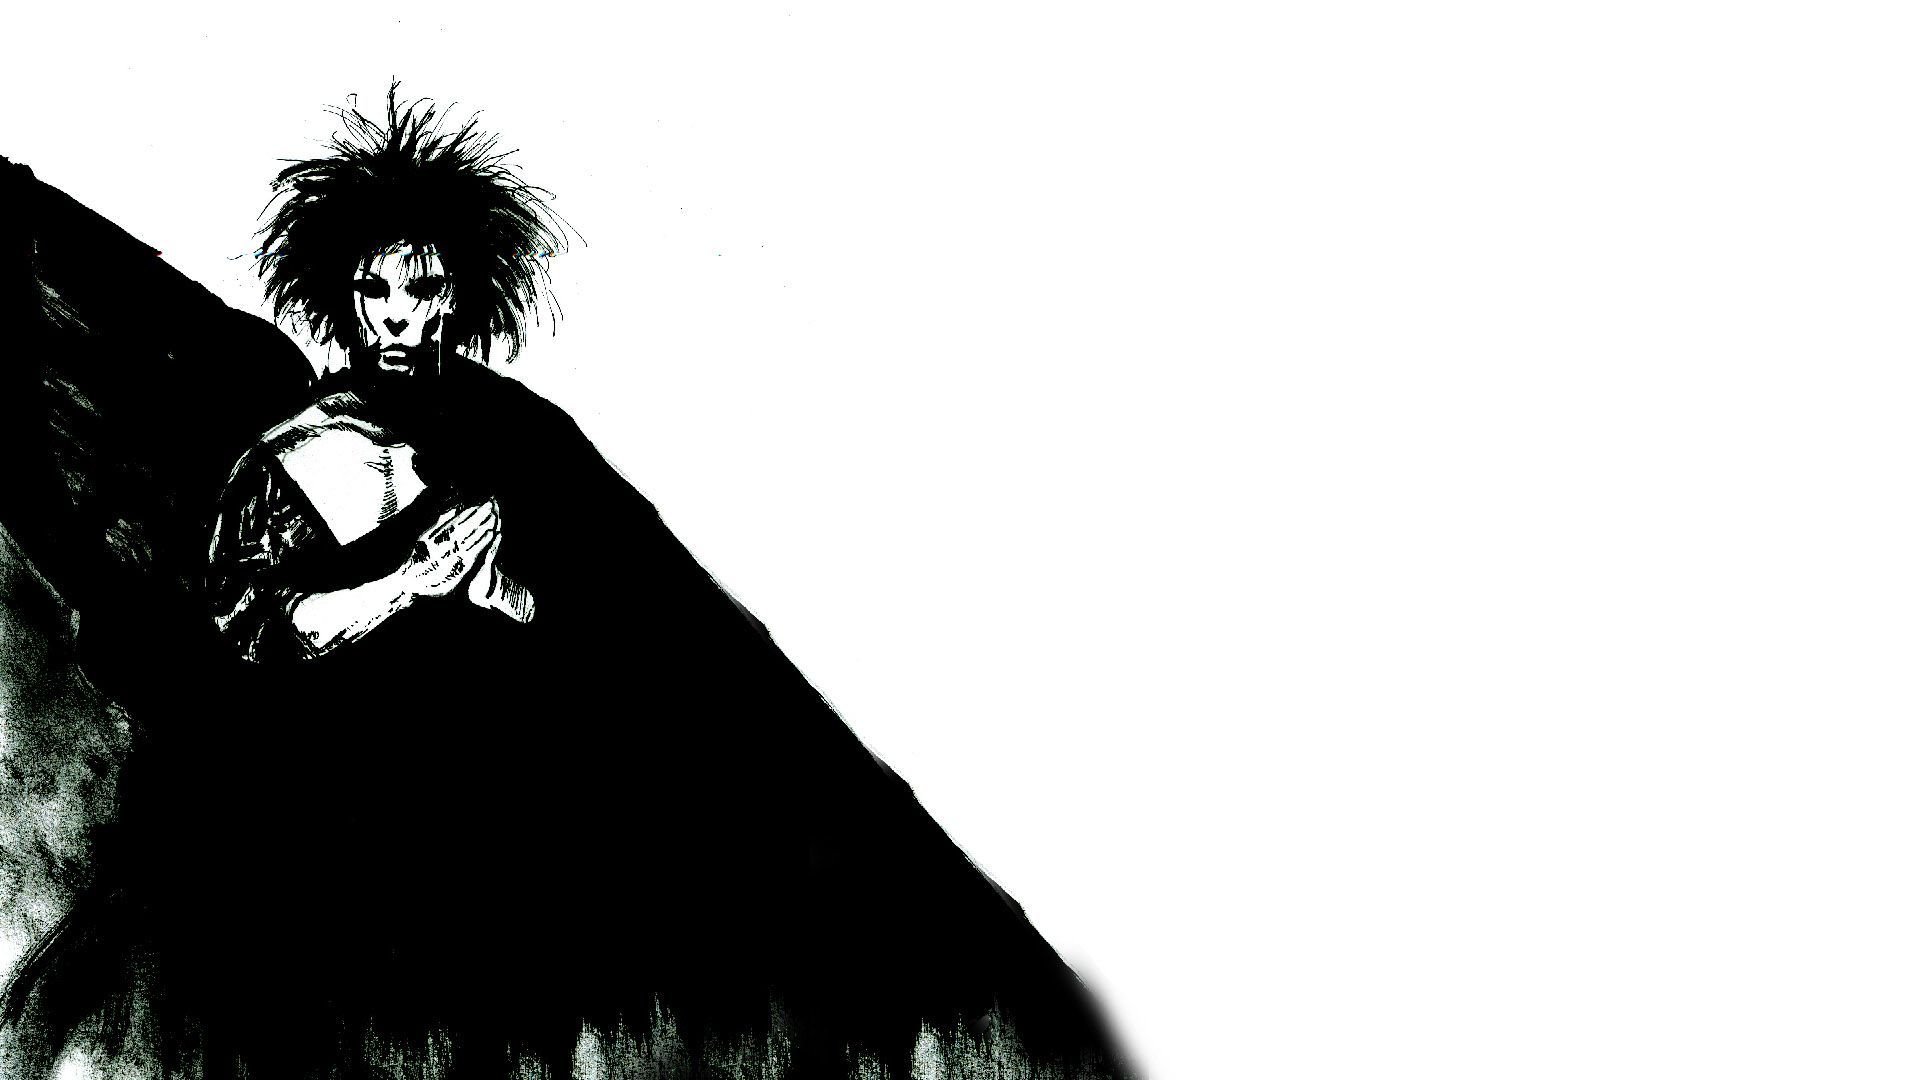 Vkv HD Widescreen Awesome Sandman Image Collection